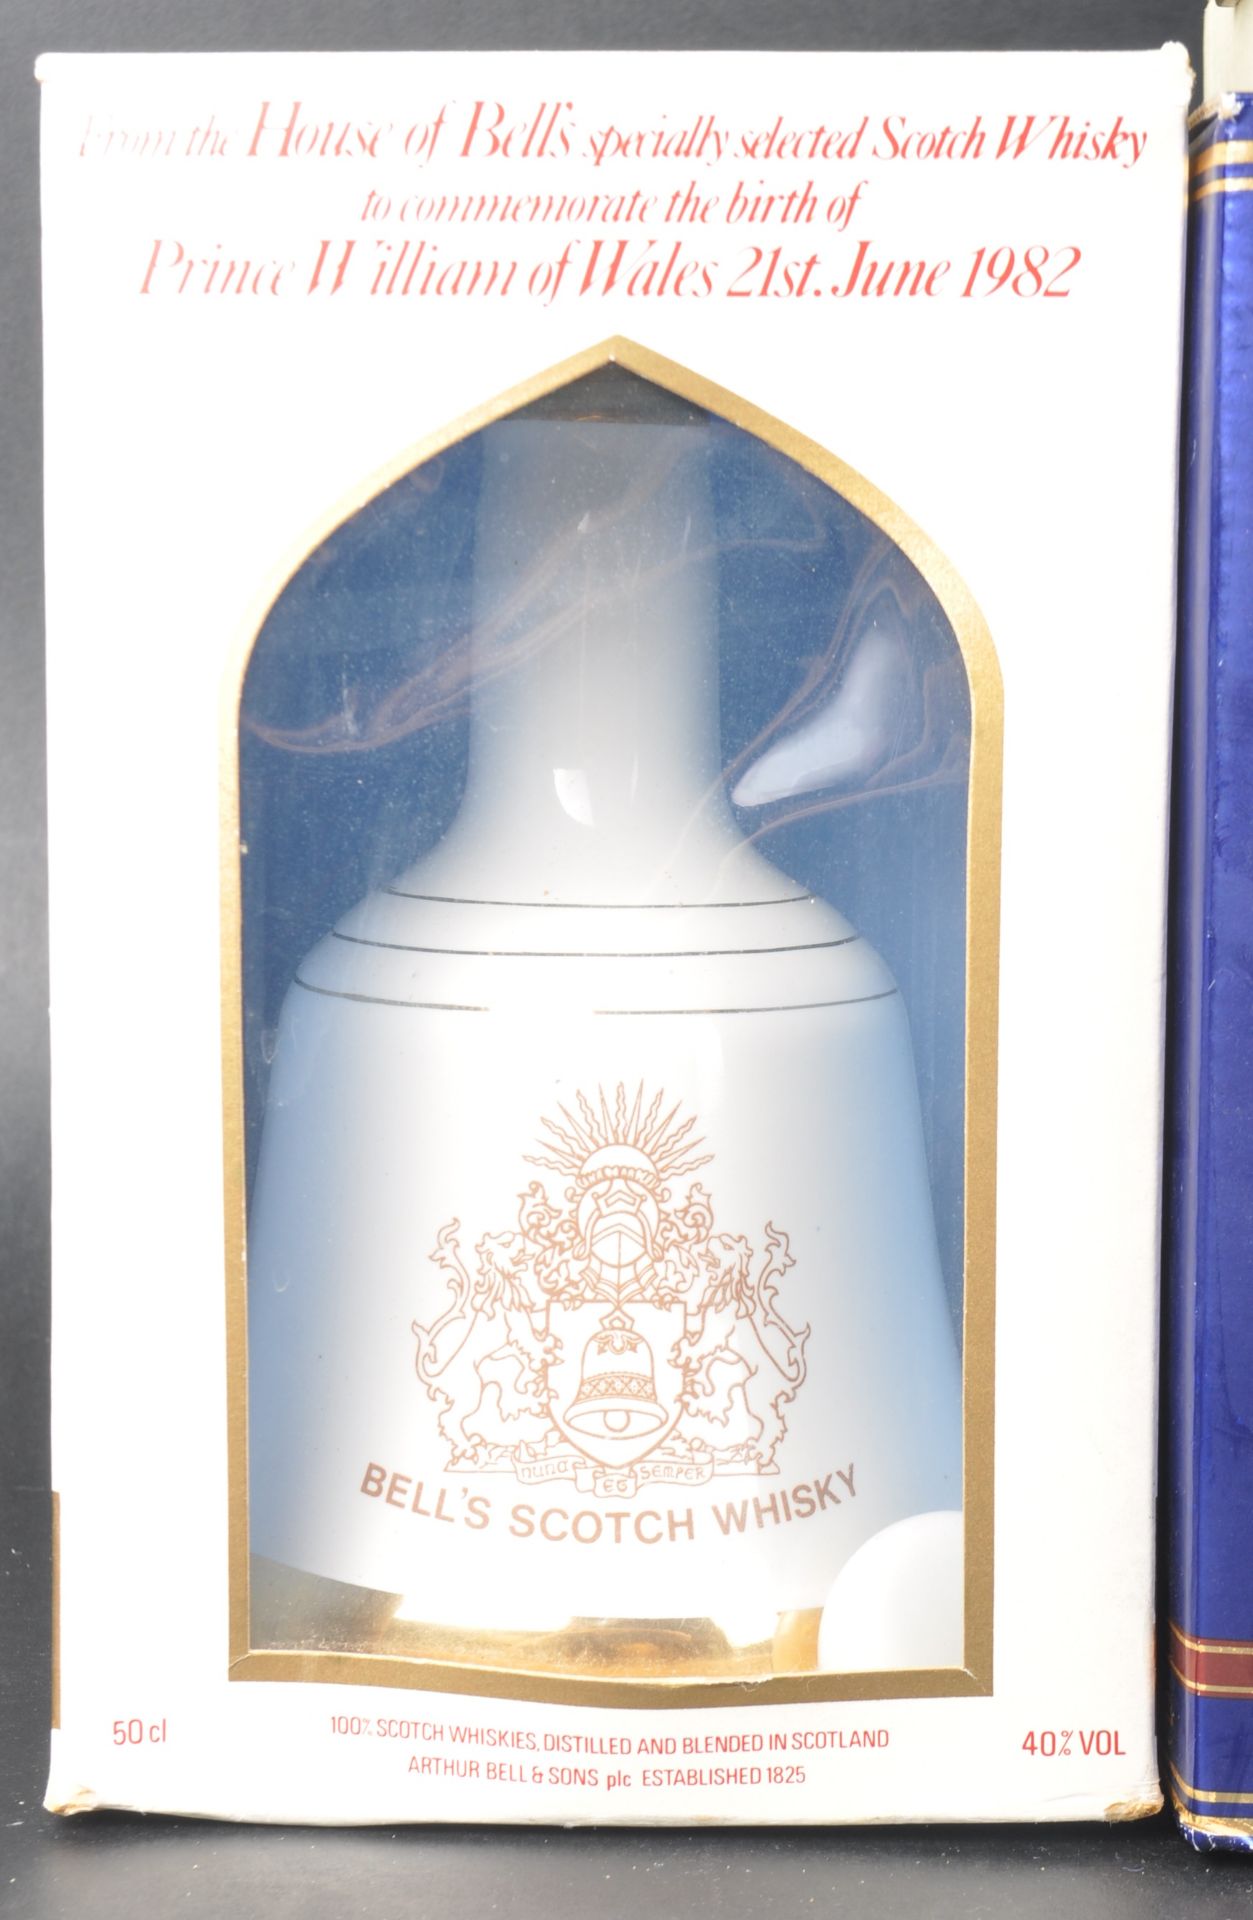 COLLECTION OF BELL'S COMMEMORATIVE WHISKY - Image 3 of 4